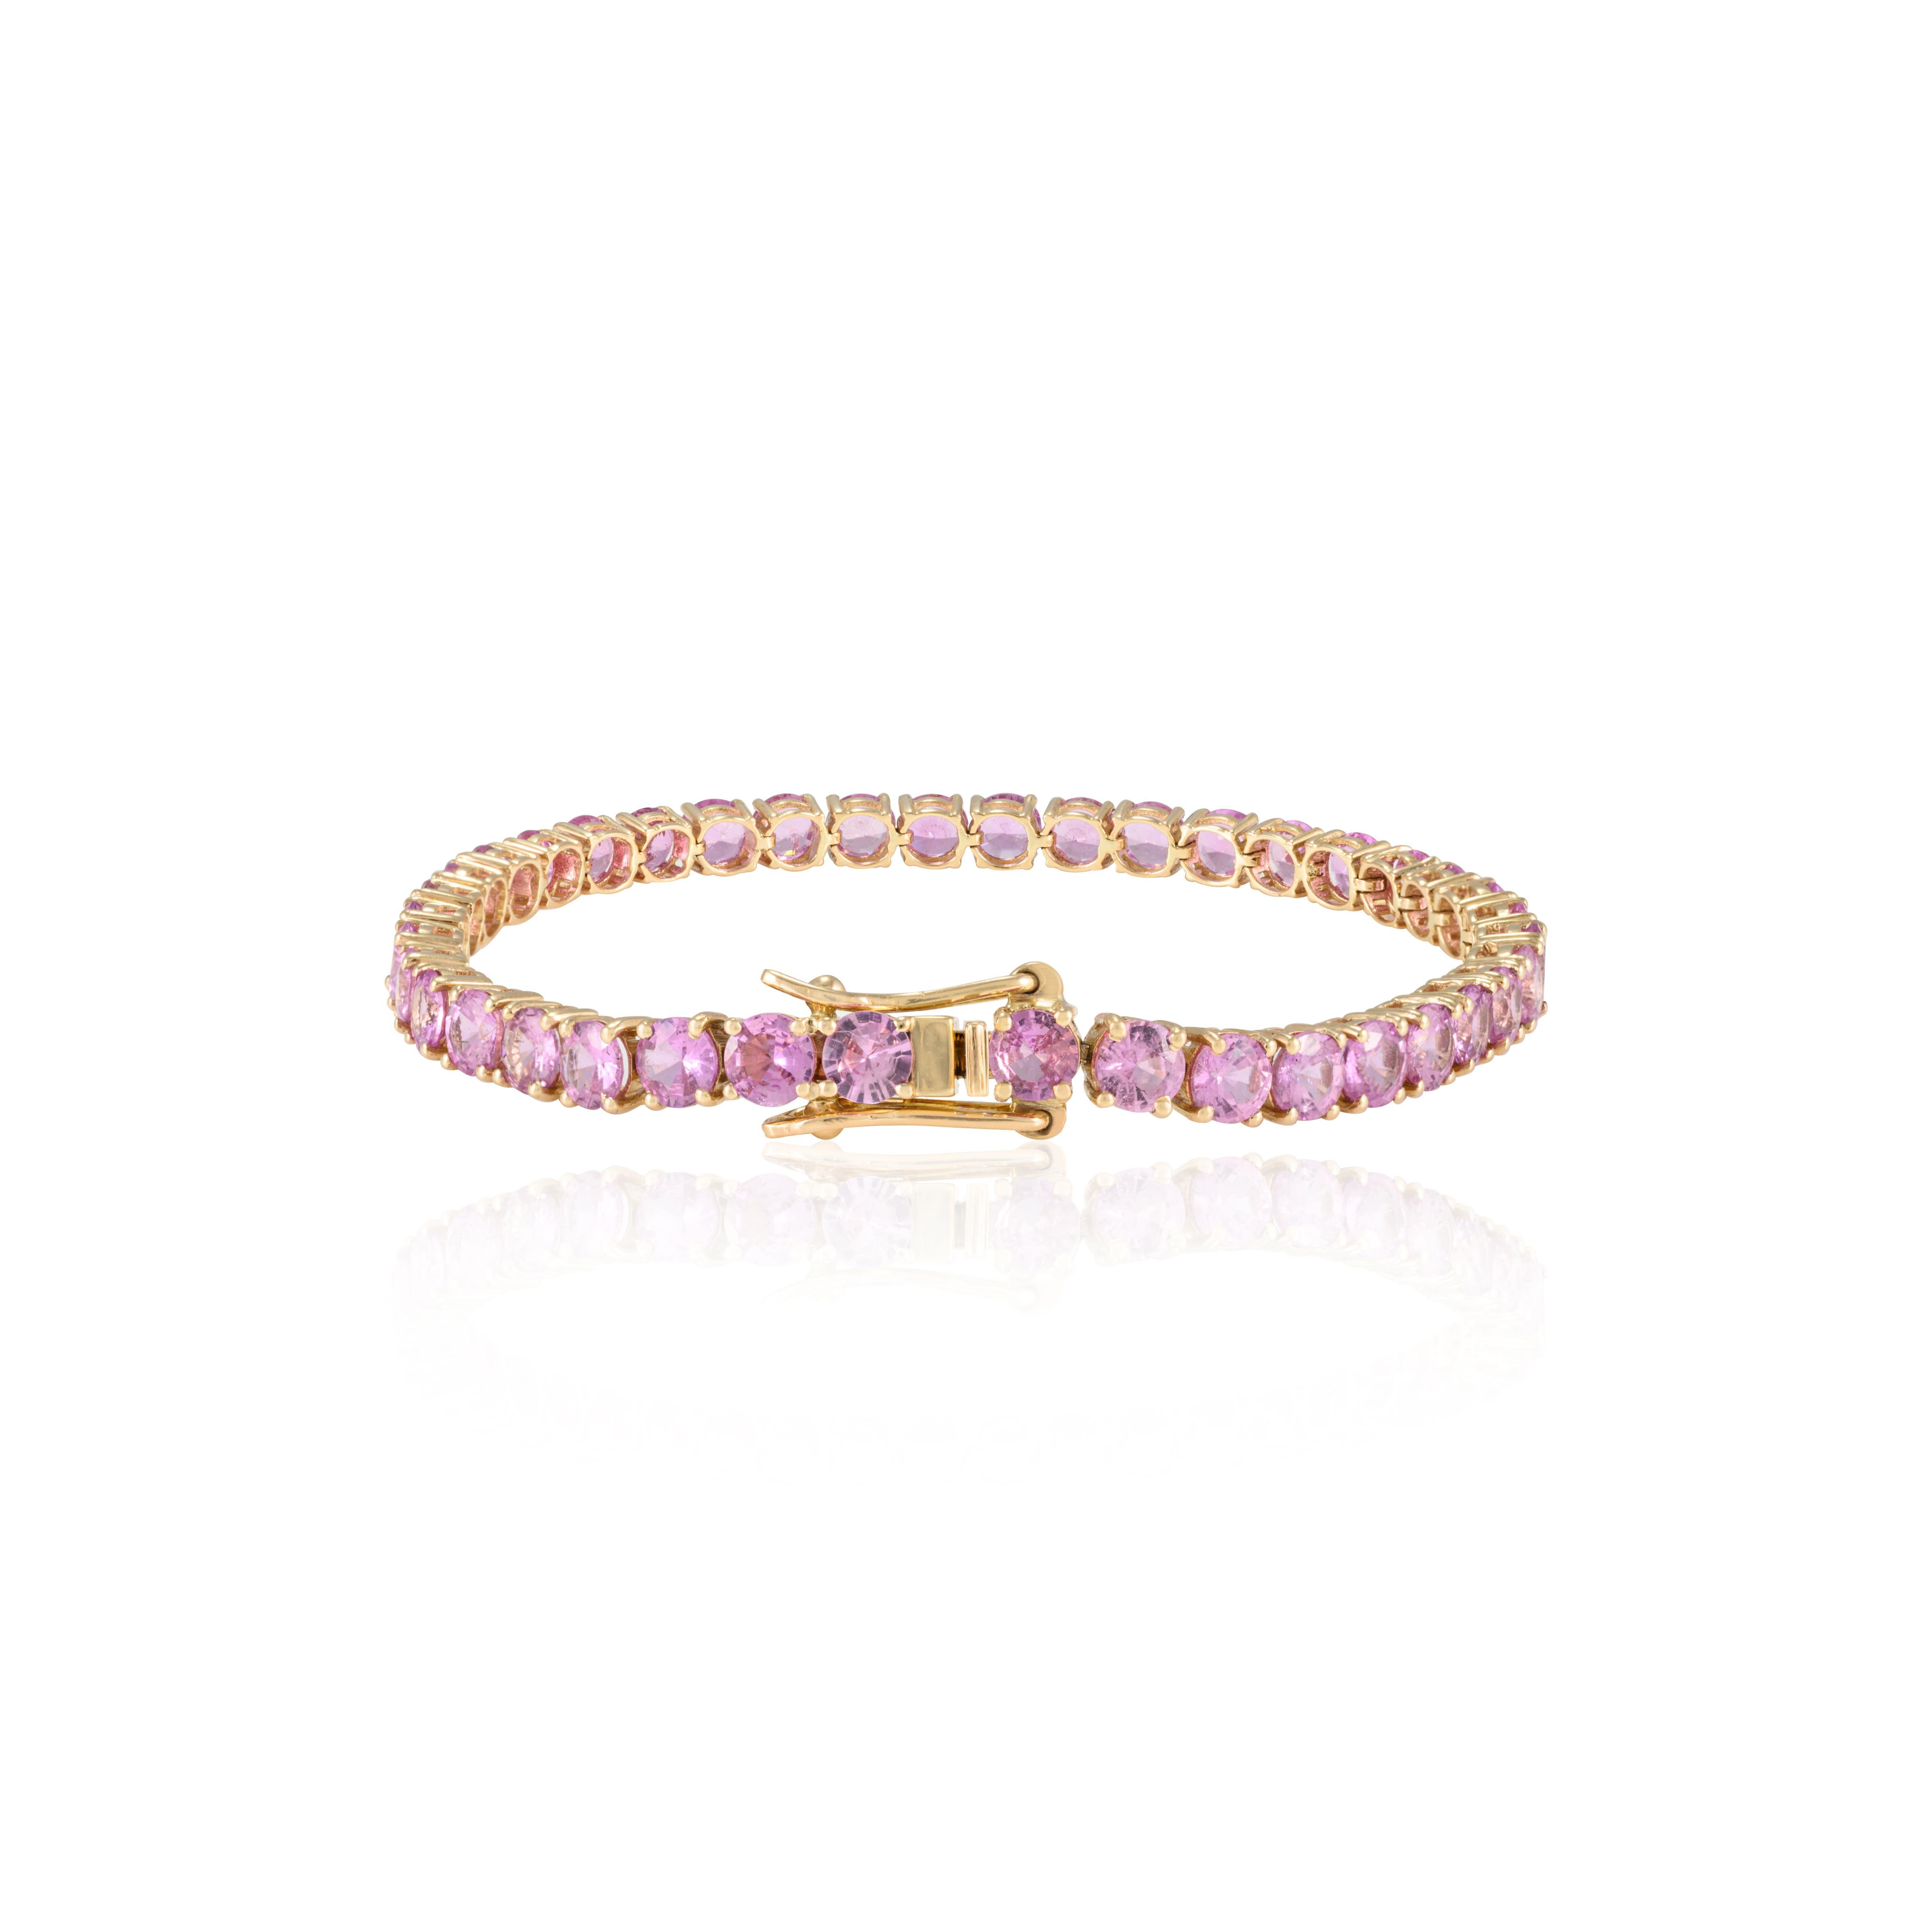 This Brilliant Pink Sapphire Tennis Bracelet in 14K gold showcases 14.83 carat endlessly sparkling natural pink sapphire. It measures 7 inches long in length. 
Sapphire stimulates concentration and reduces stress. 
Designed with perfect round cut